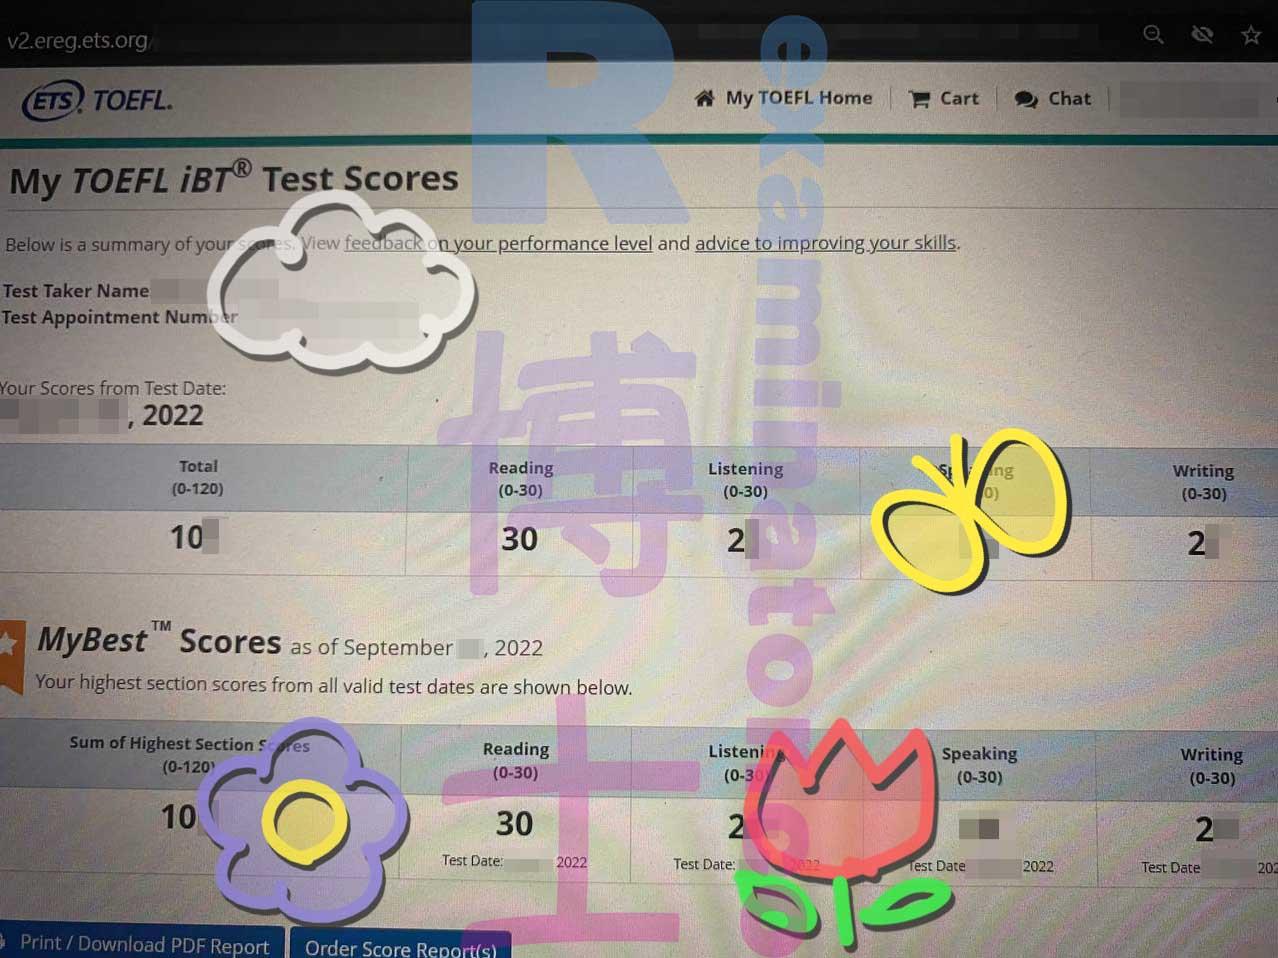 Score image for TOEFL Cheating success story #387